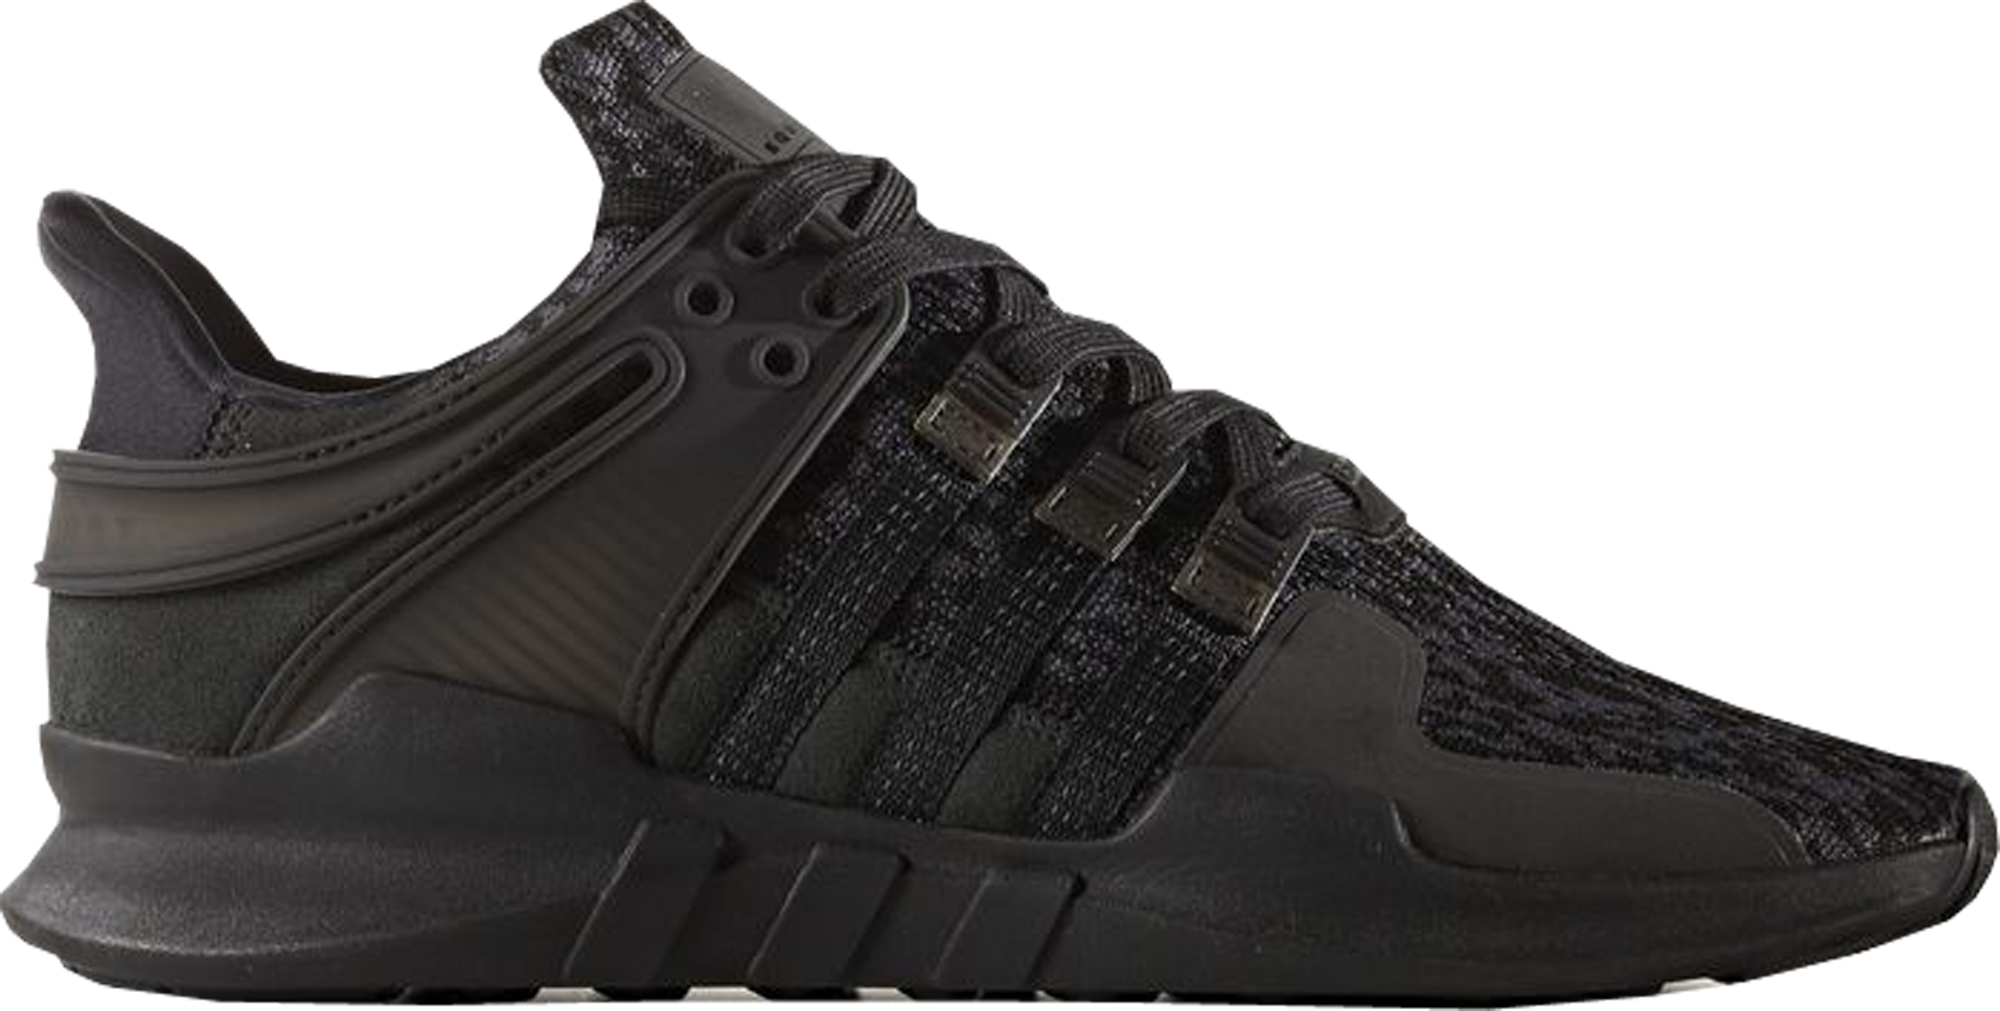 adidas eqt support adv for sale